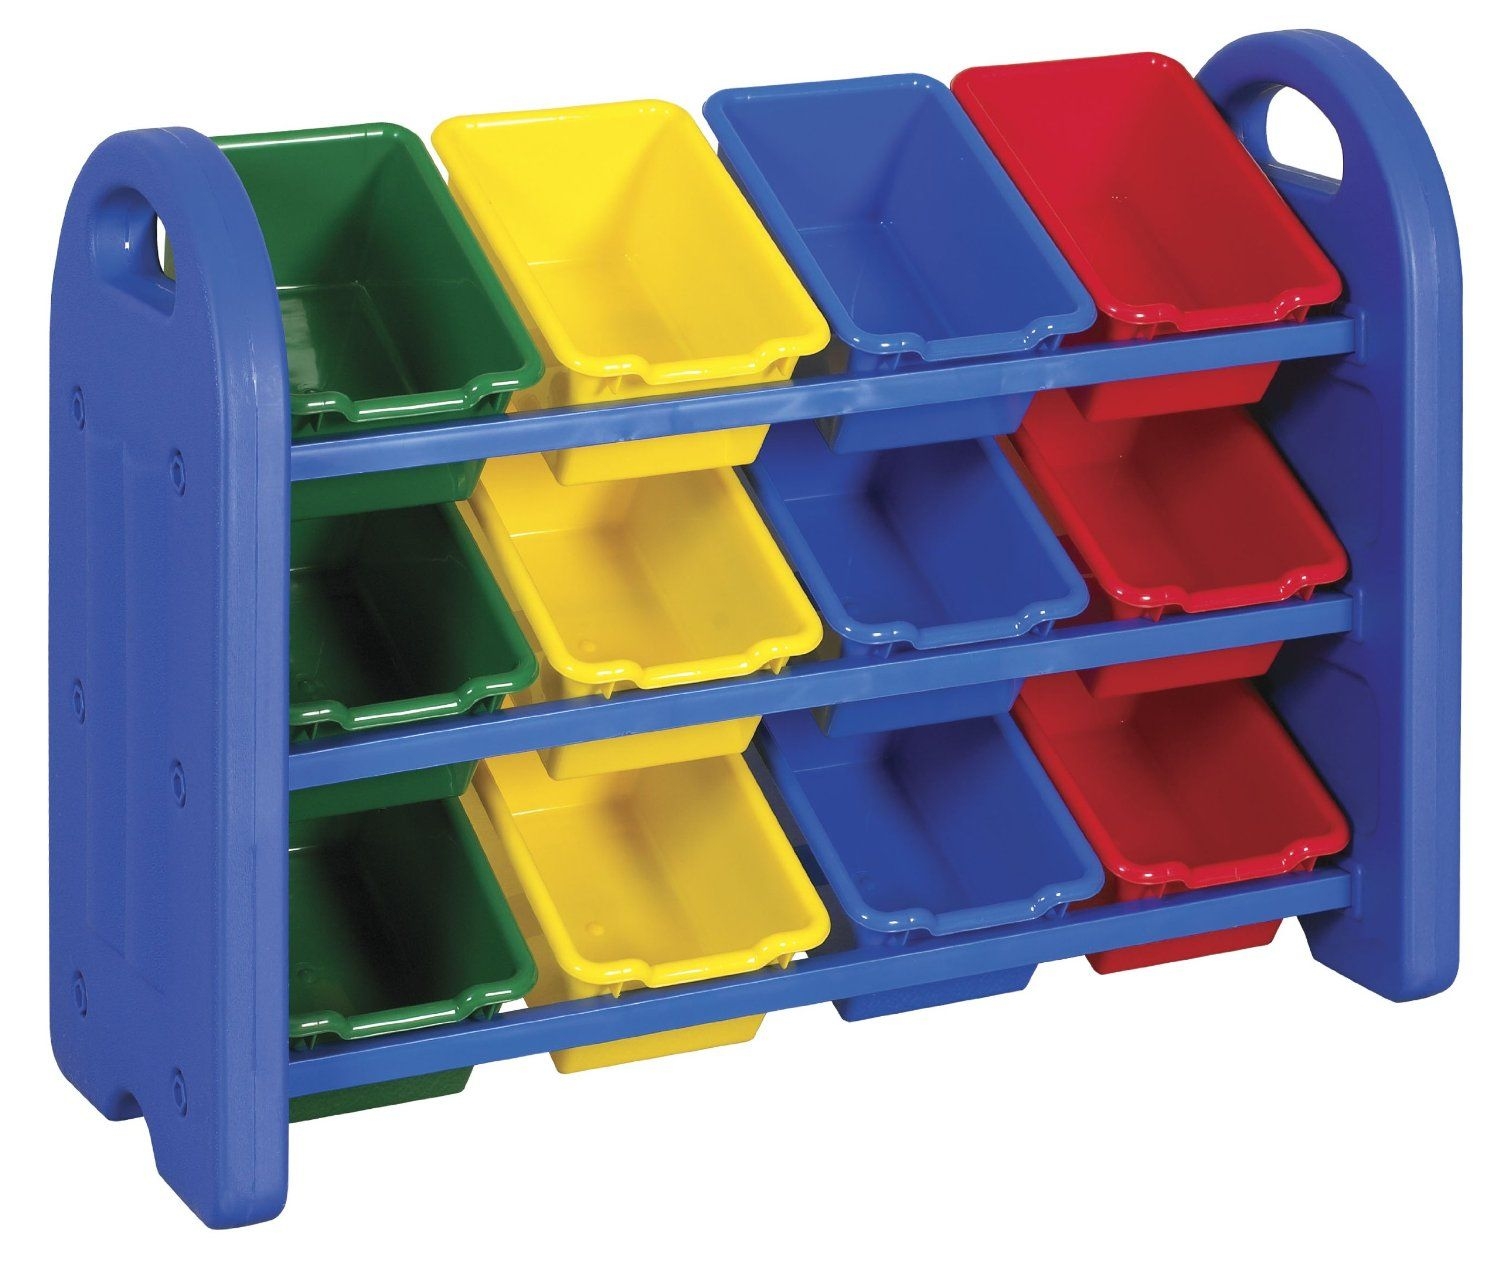 plastic toy bins replacement